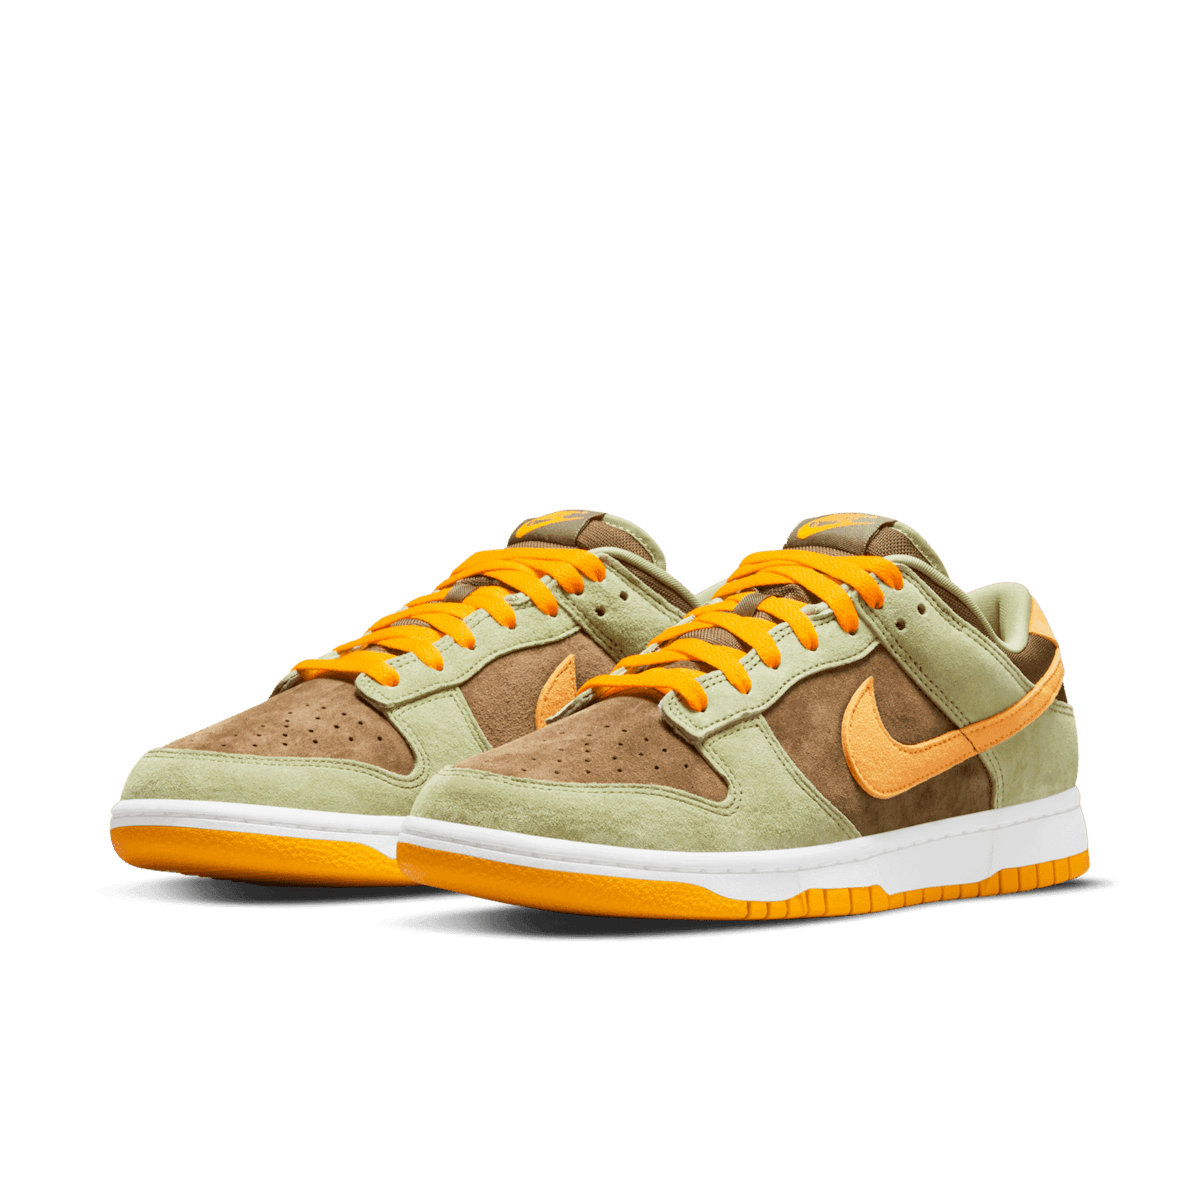 Nike Dunk Low Dusty Olive Raffles DH5360-300 Date - Release and